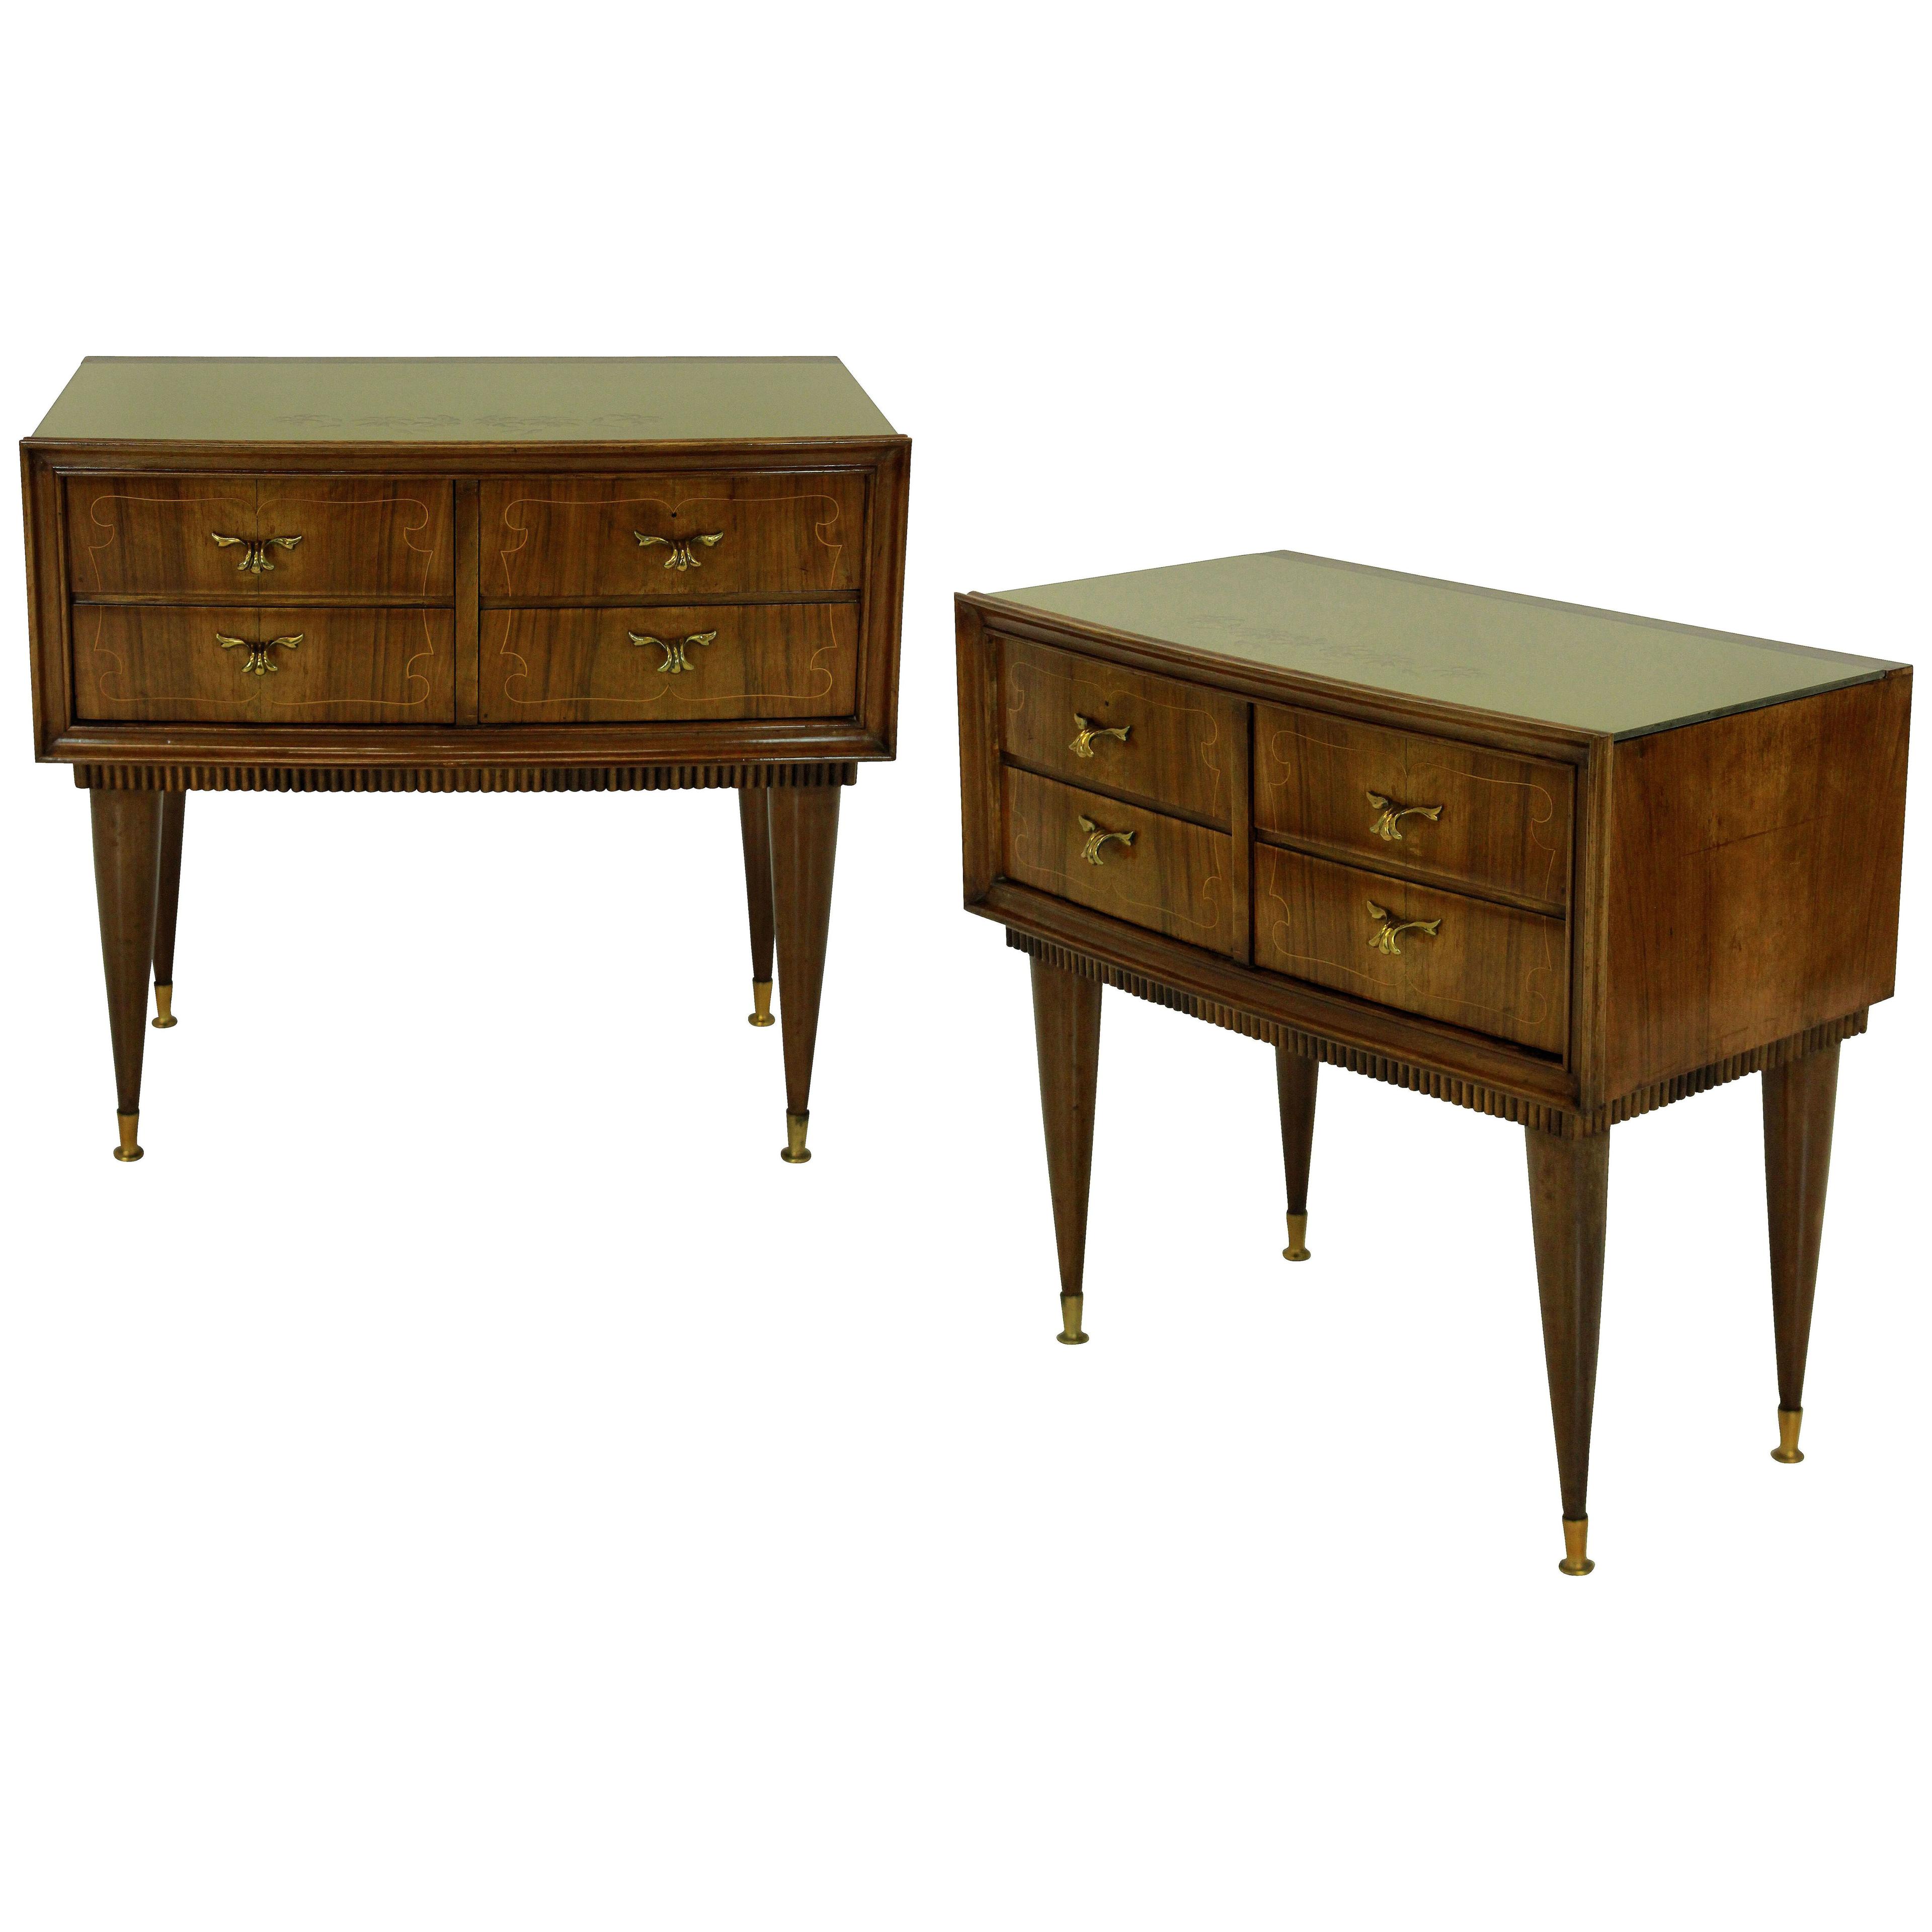 A PAIR OF MID-CENTURY NIGHT STANDS IN WALNUT